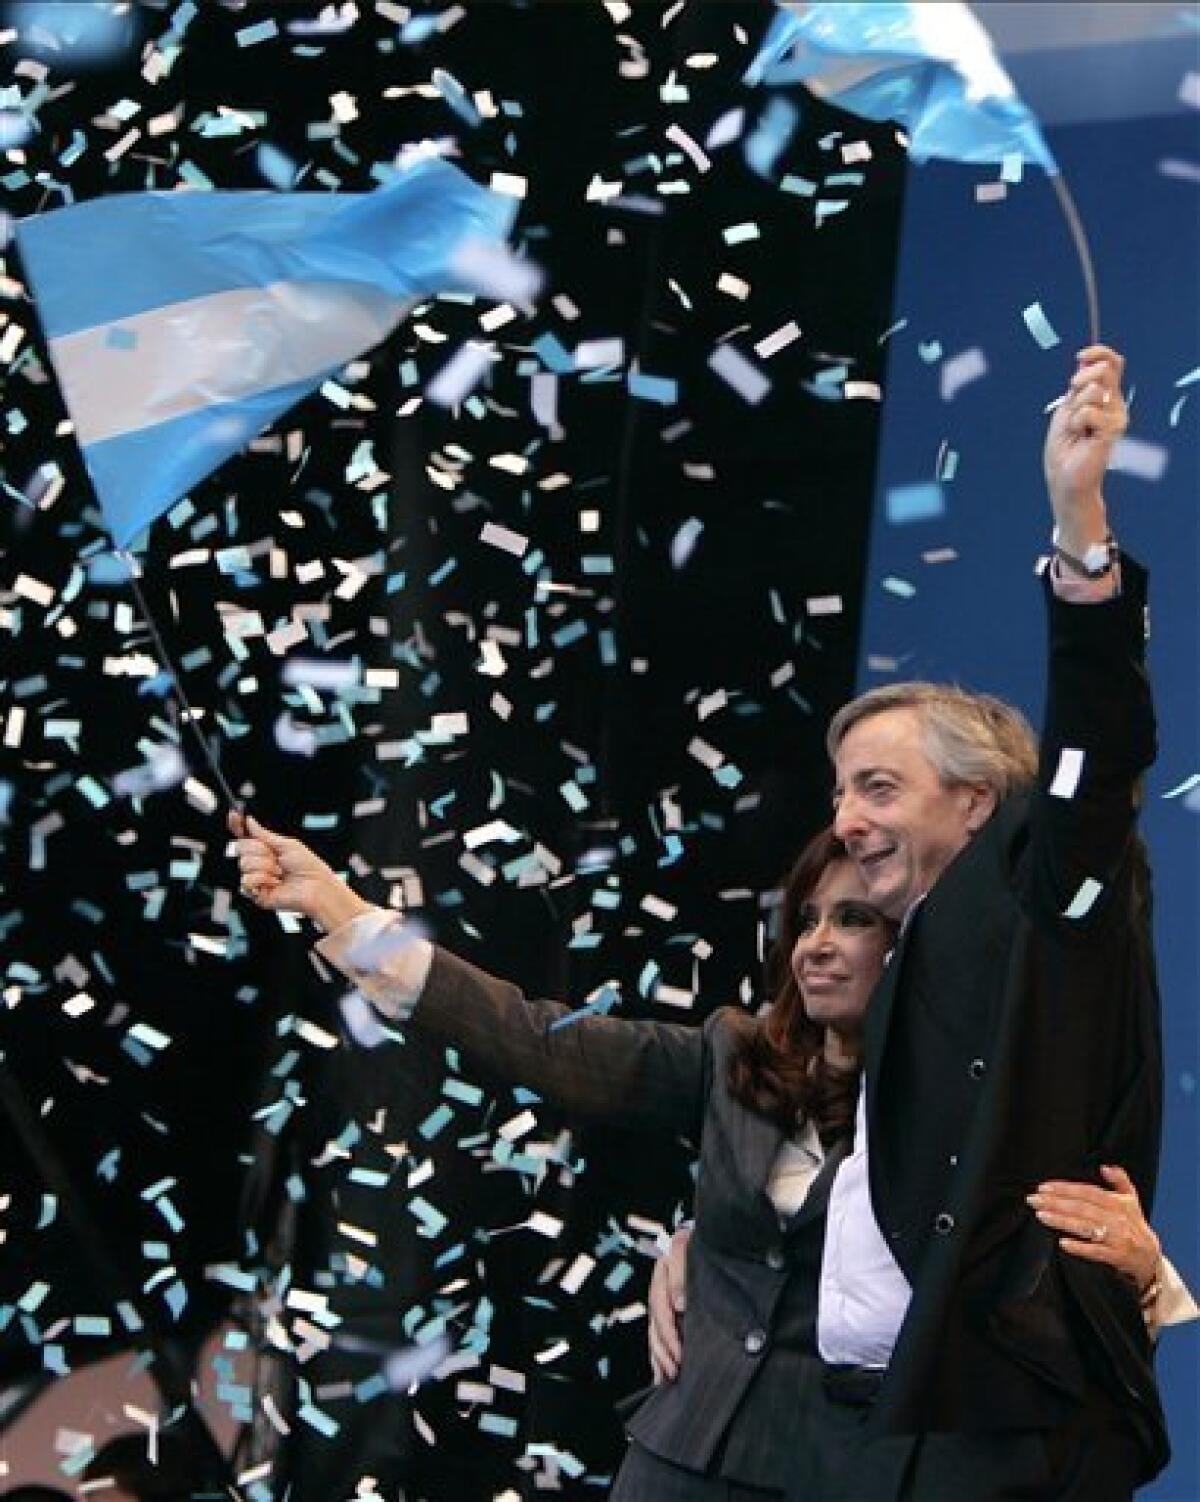 FILE - In this June 18, 2008 file photo, Argentina's President Cristina Fernandez de Kirchner, left, and her husband former president Nestor Kirchner wave to supporters at a pro-government rally in Buenos Aires, Argentina. According to state television in Argentina, Nestor Kirchner died on Wednesday Oct. 27, 2010 of a heart attack at age 60. (AP Photo/Eduardo Di Baia, File)